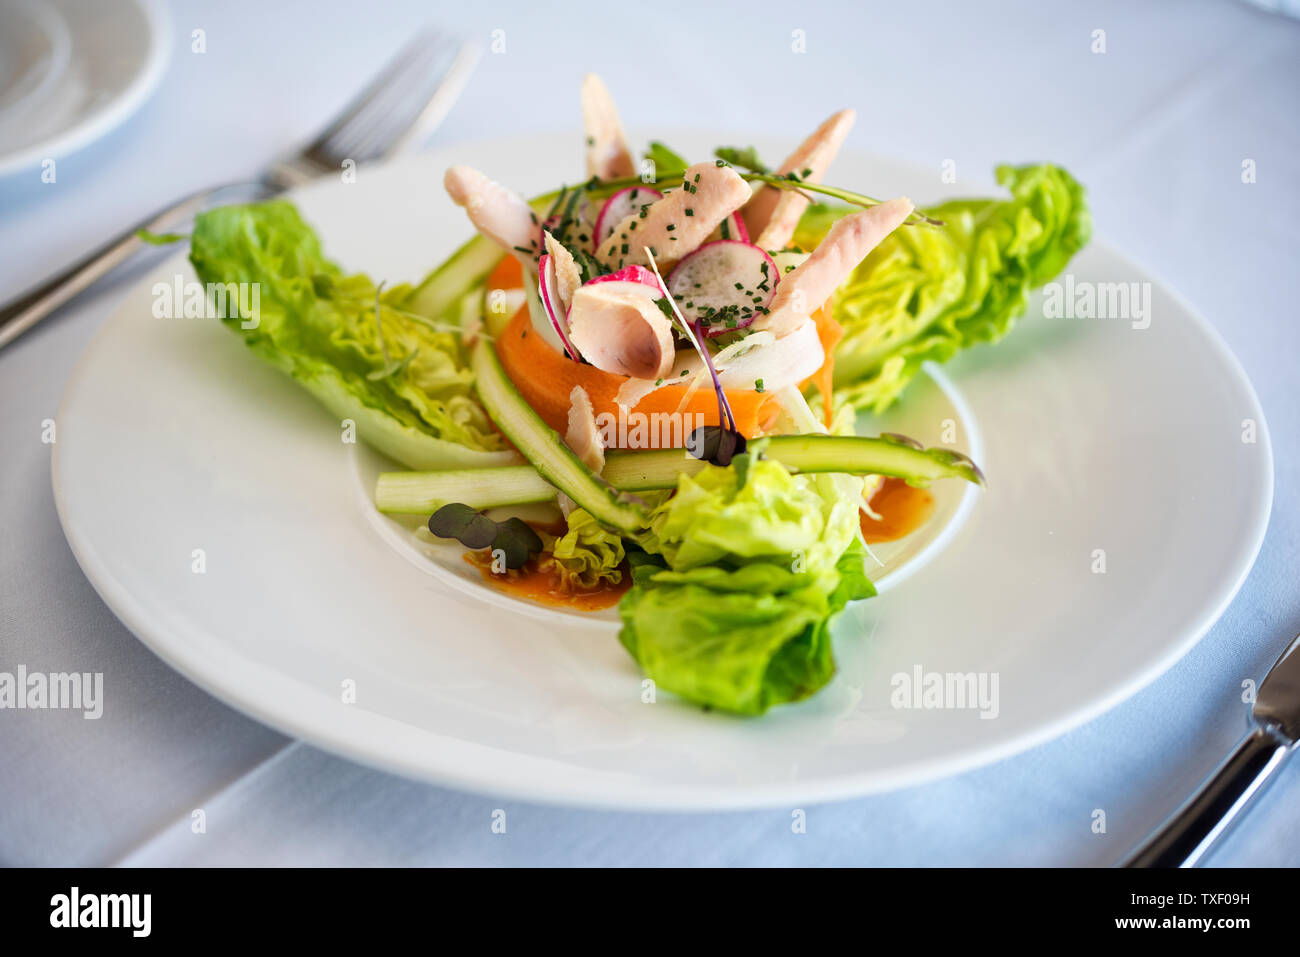 Tuna salad with asparagus, lettuce, carrots and radish, sprinkled with chives. Healthy green salad. Stock Photo